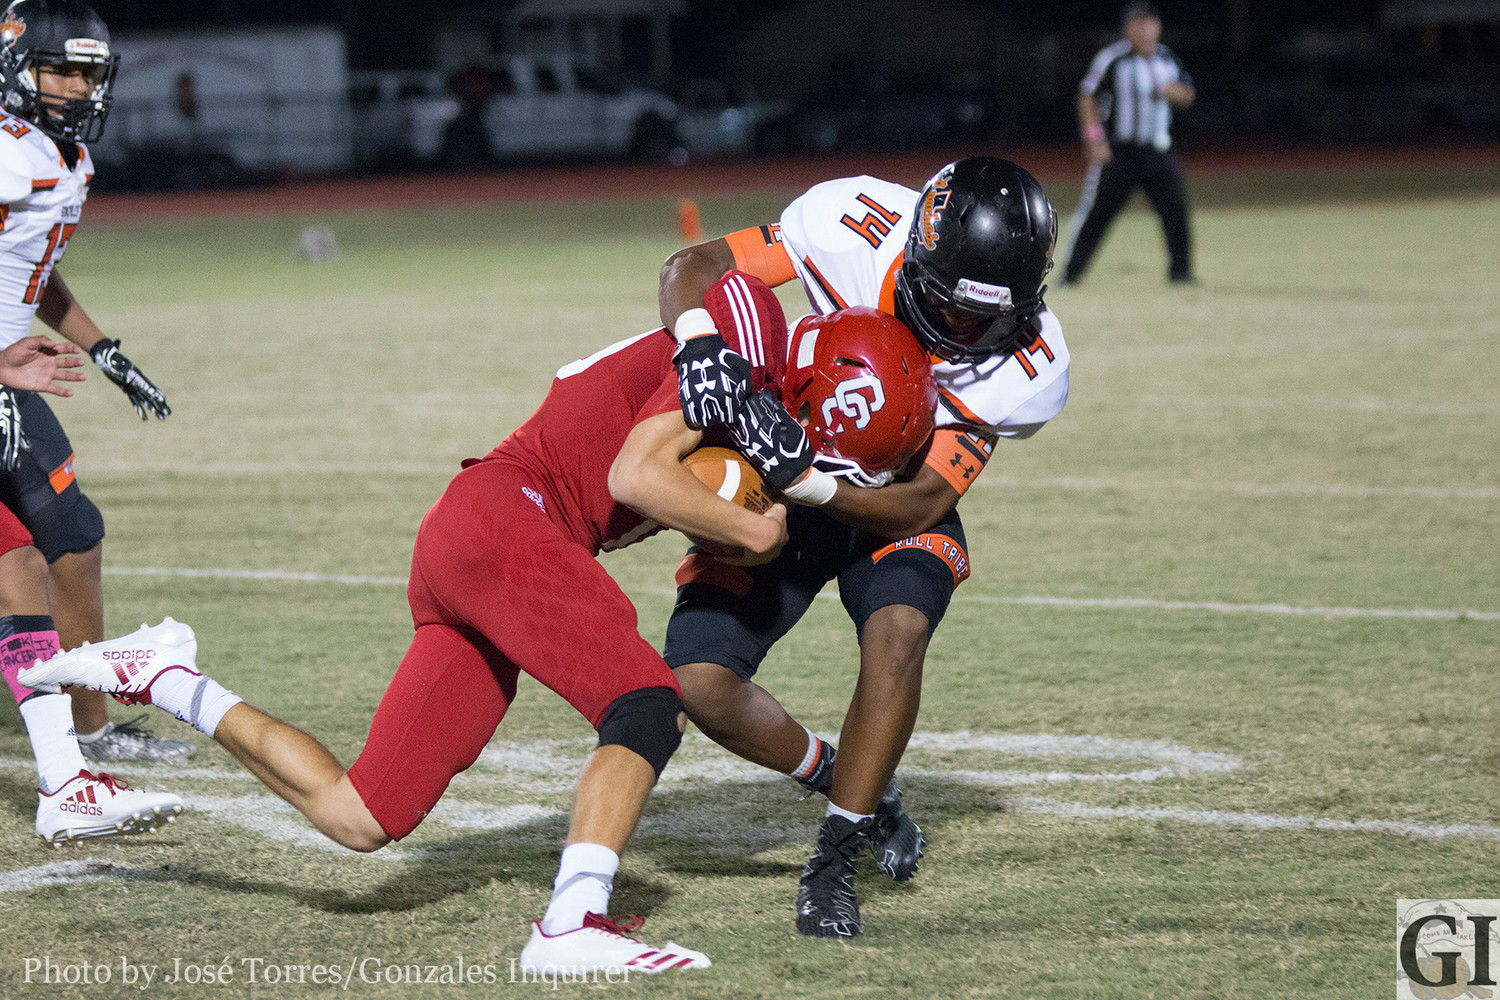 Kenneth Cavit (14) wraps up a rusher.